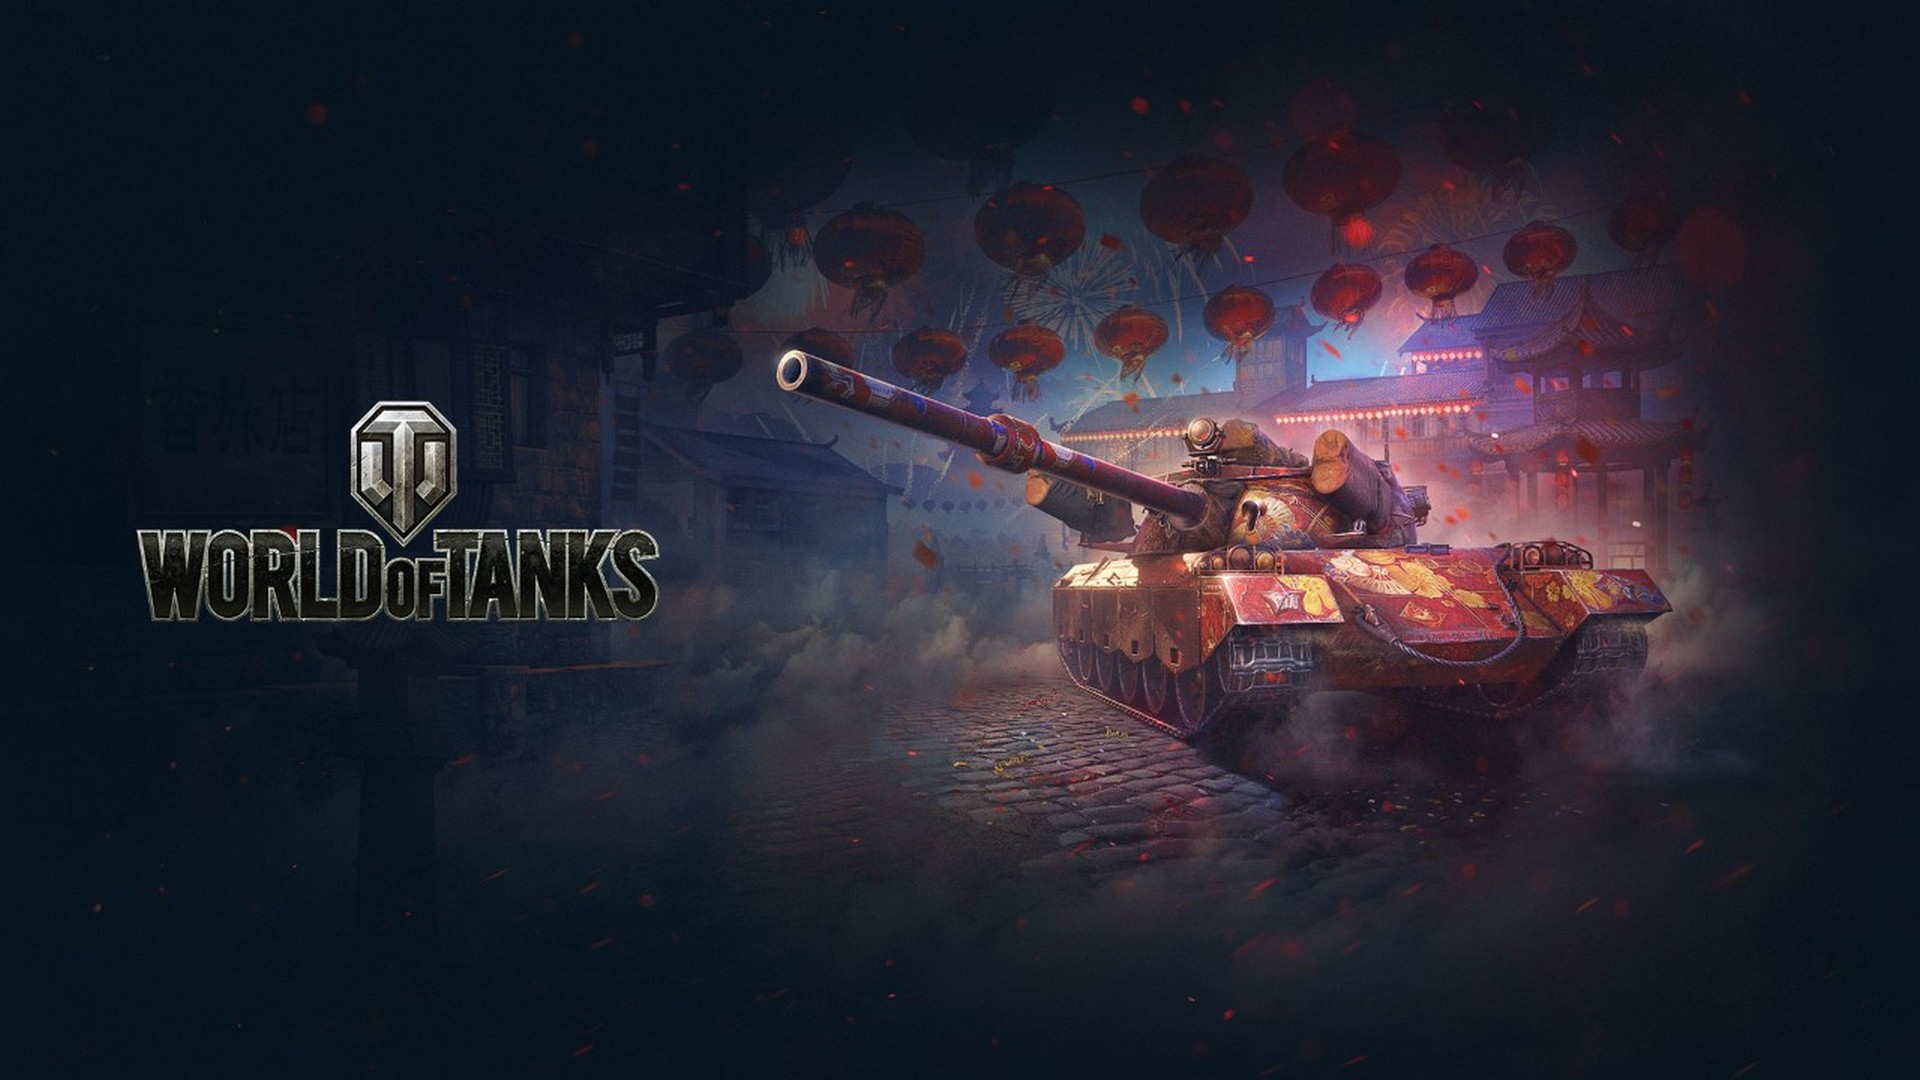 Celebrate The Lunar New Year In World of Tanks and World of Tanks Blitz